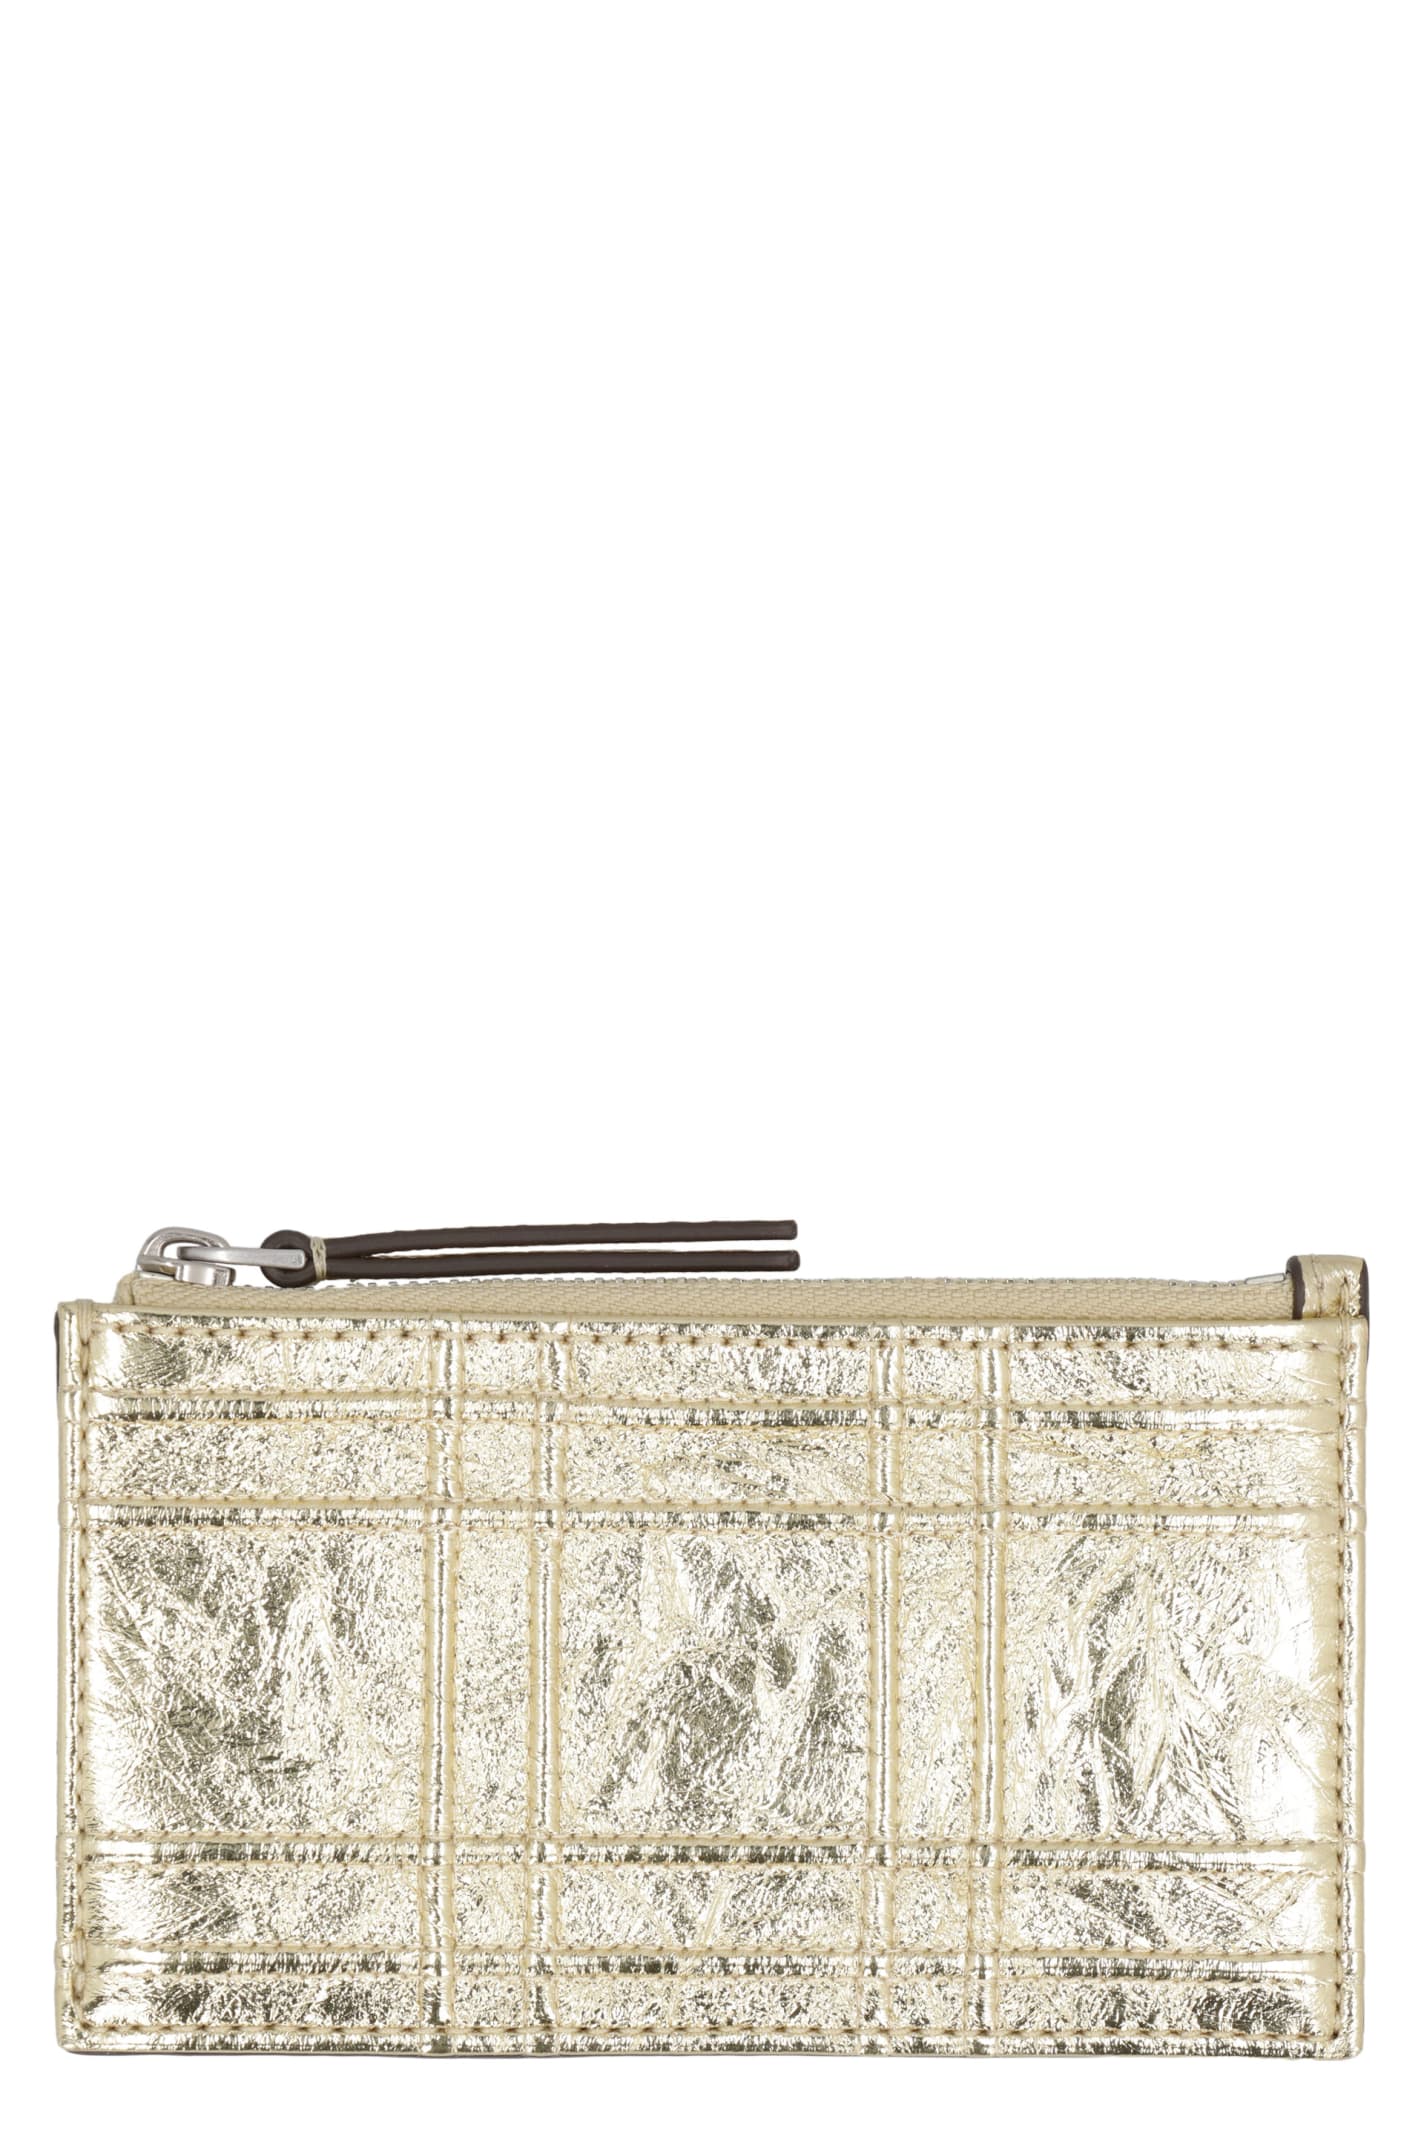 TORY BURCH FLEMING LEATHER CARD HOLDER